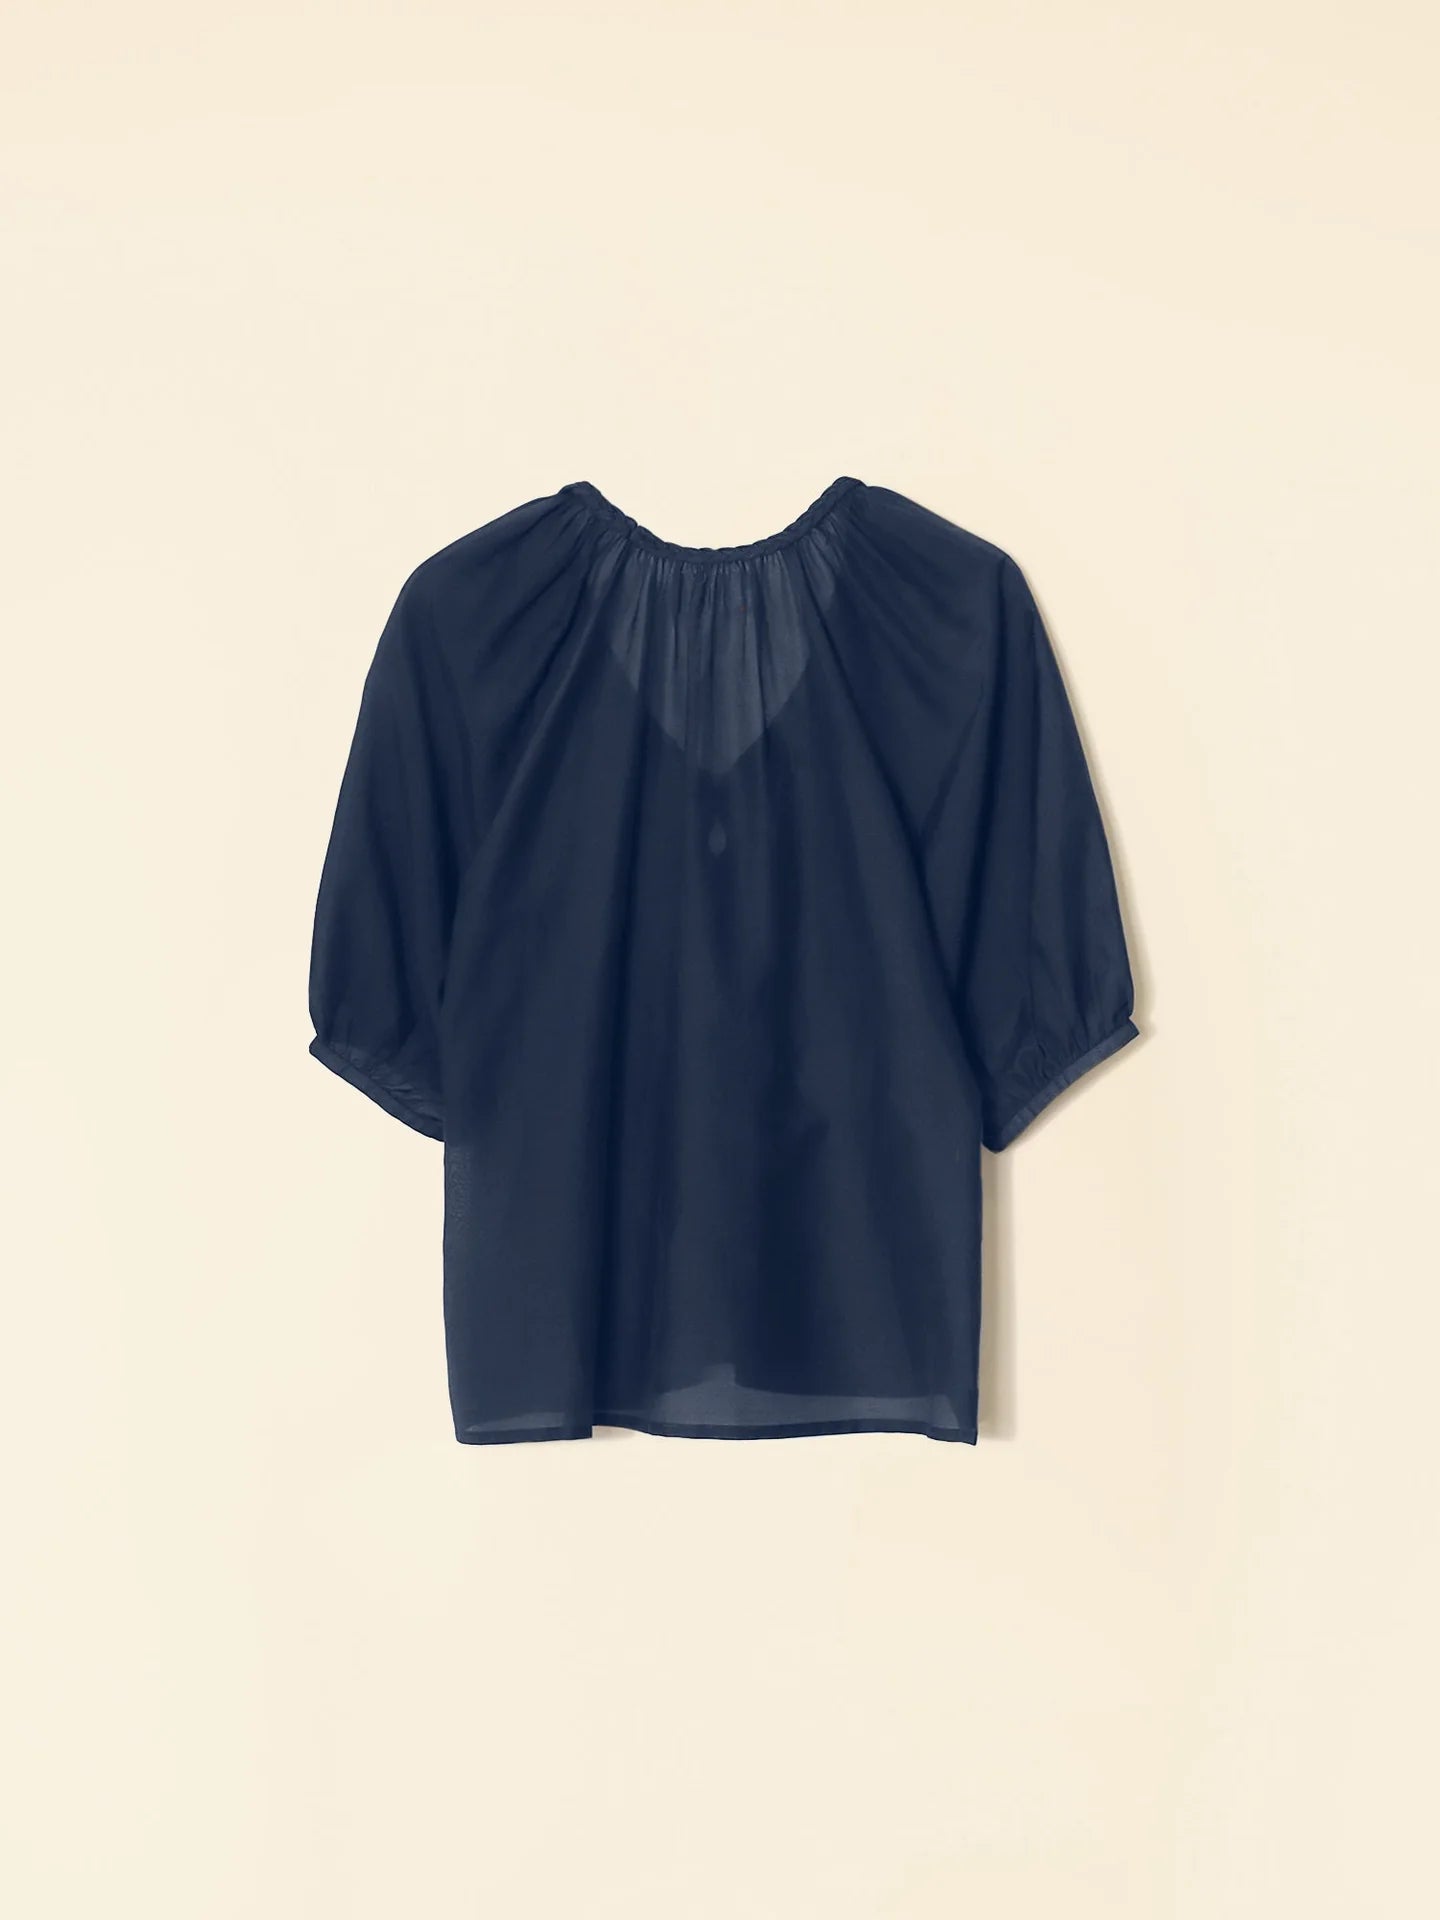 Blythe Top in Blue Sapphire